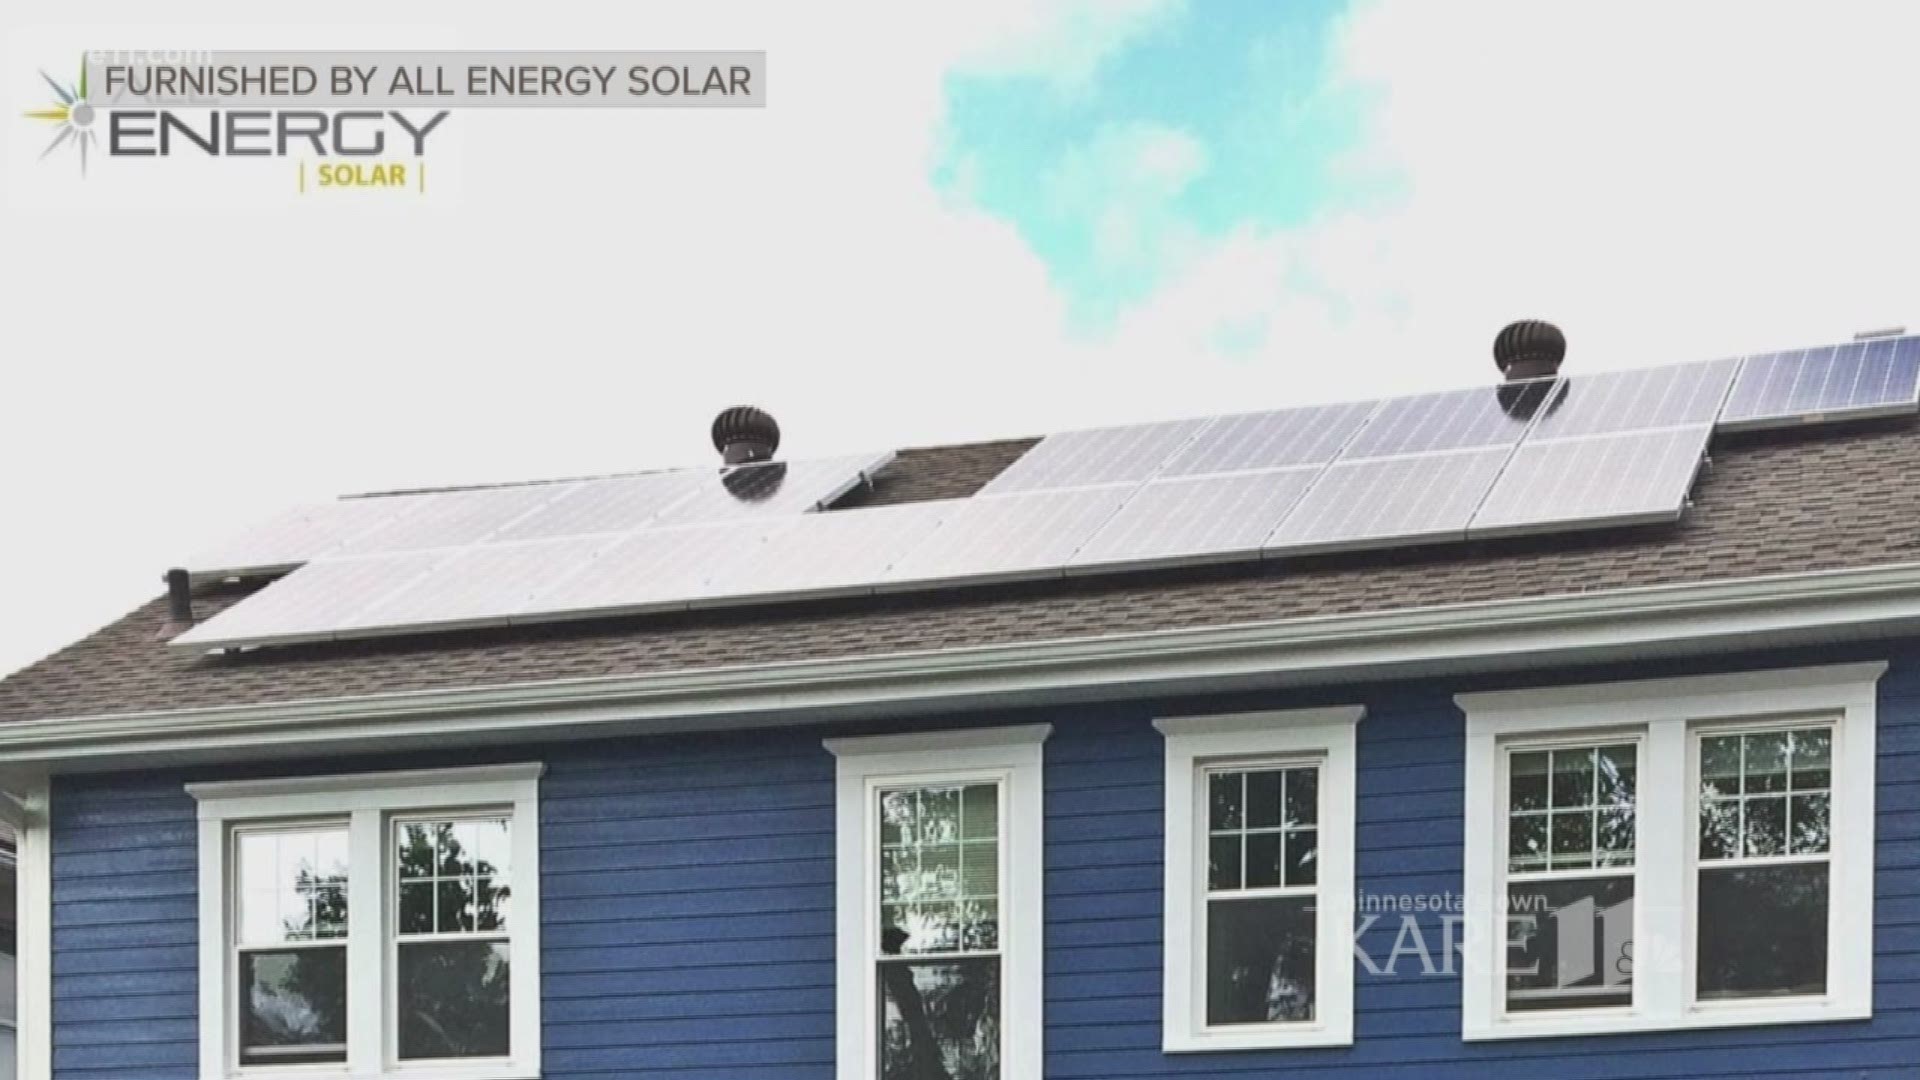 Michael Allen with All Energy Solar stopped by KARE 11 at 4 to talk about solar energy and how it's the fastest growing source of energy. http://kare11.tv/2DC9rz3